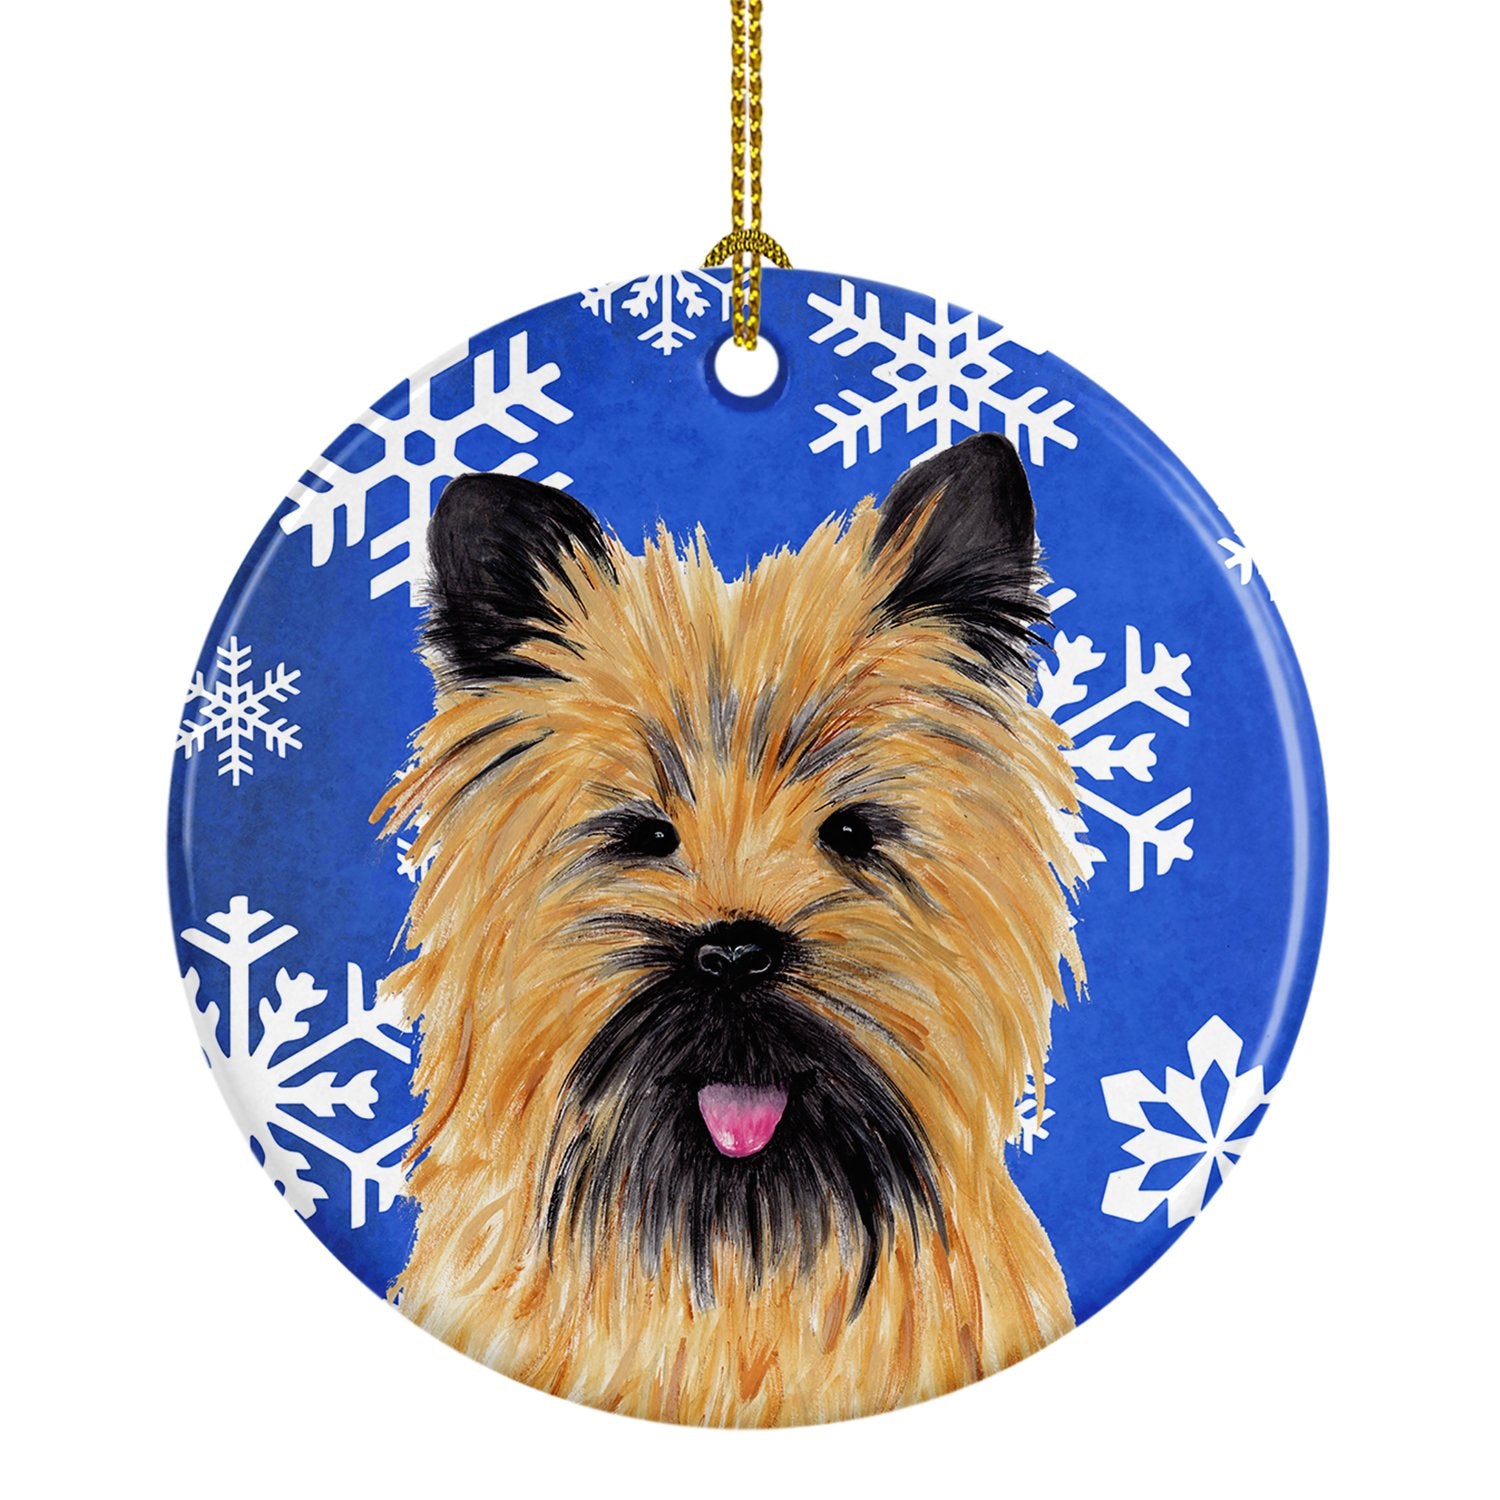 Cairn Terrier Winter Snowflakes Holiday Ceramic Ornament SC9375 by Caroline's Treasures